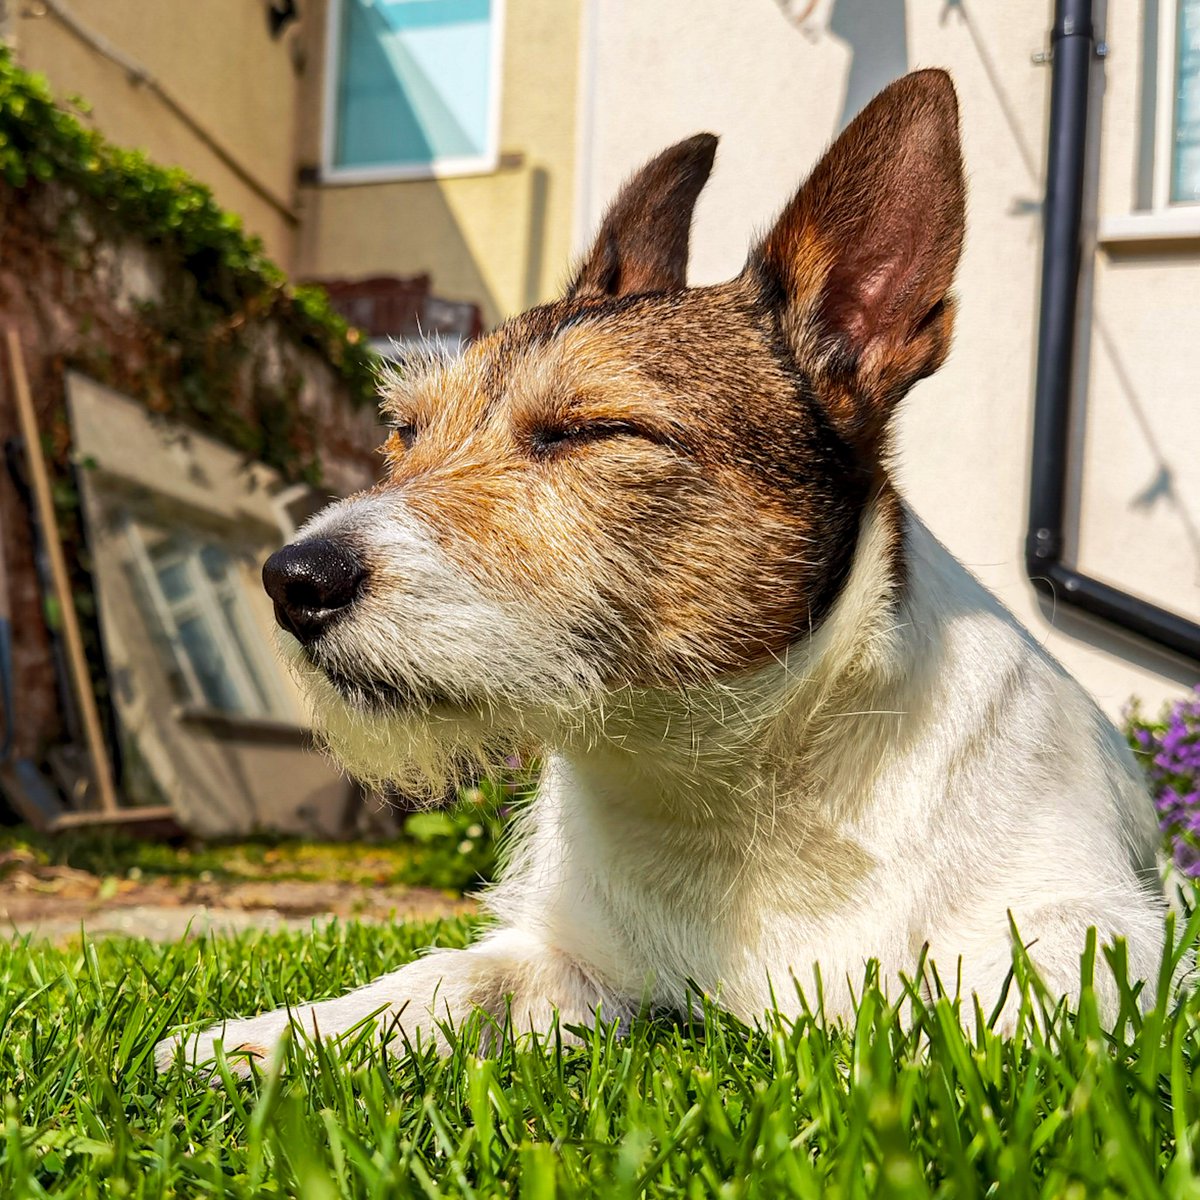 To hot to take him for a walk so time to chill and take in the sun.

#jrt #jackrussellterrier #dogsoftwitter #huaweip40pro #doncaster